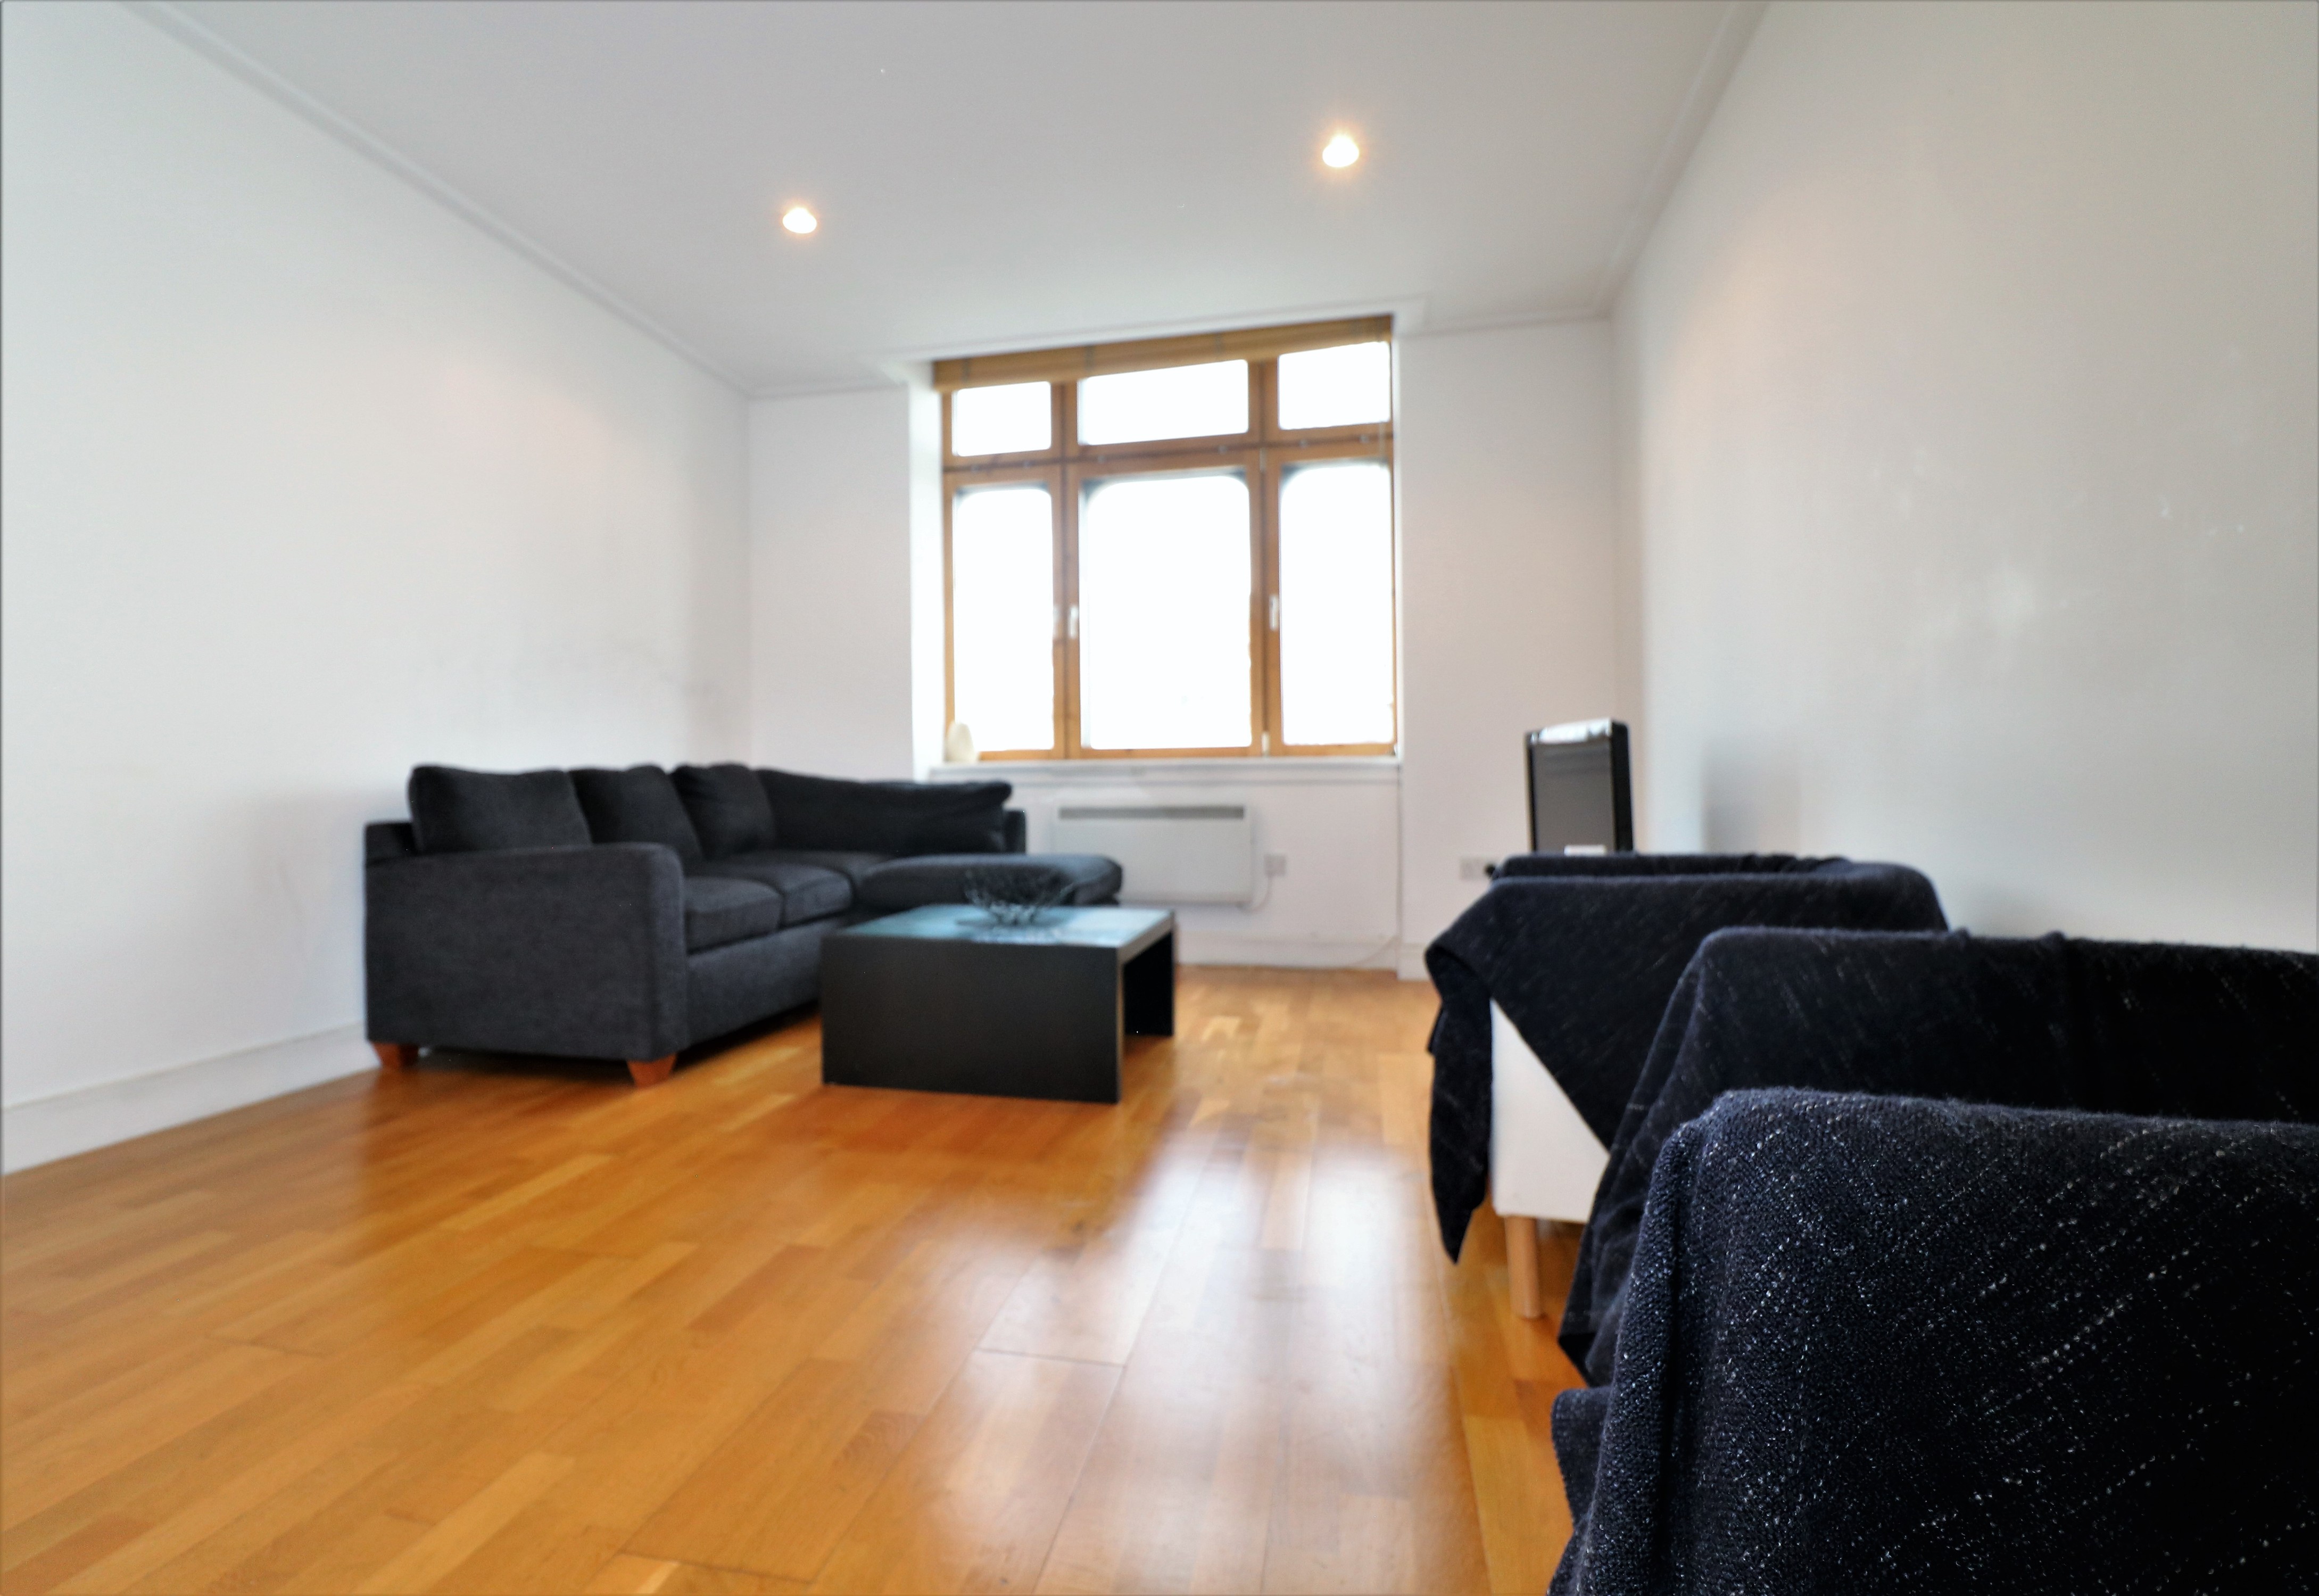 Spacious third floor one bed apartment near Old Street, EC1V.